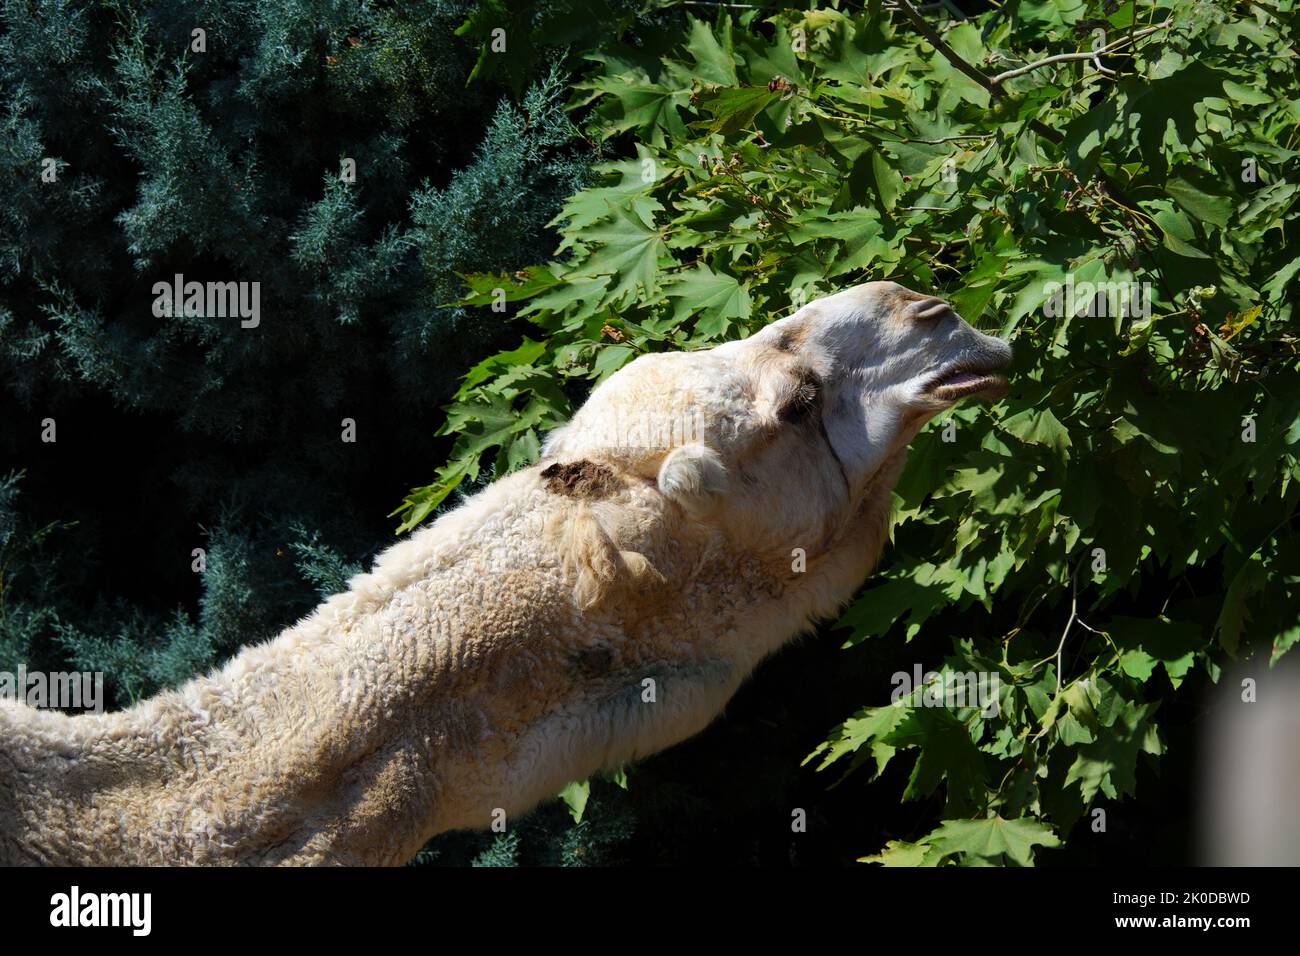 Dromedary -Camelus Dromederius- Arabian Camel at zoo eating leaves and grass Stock Photo